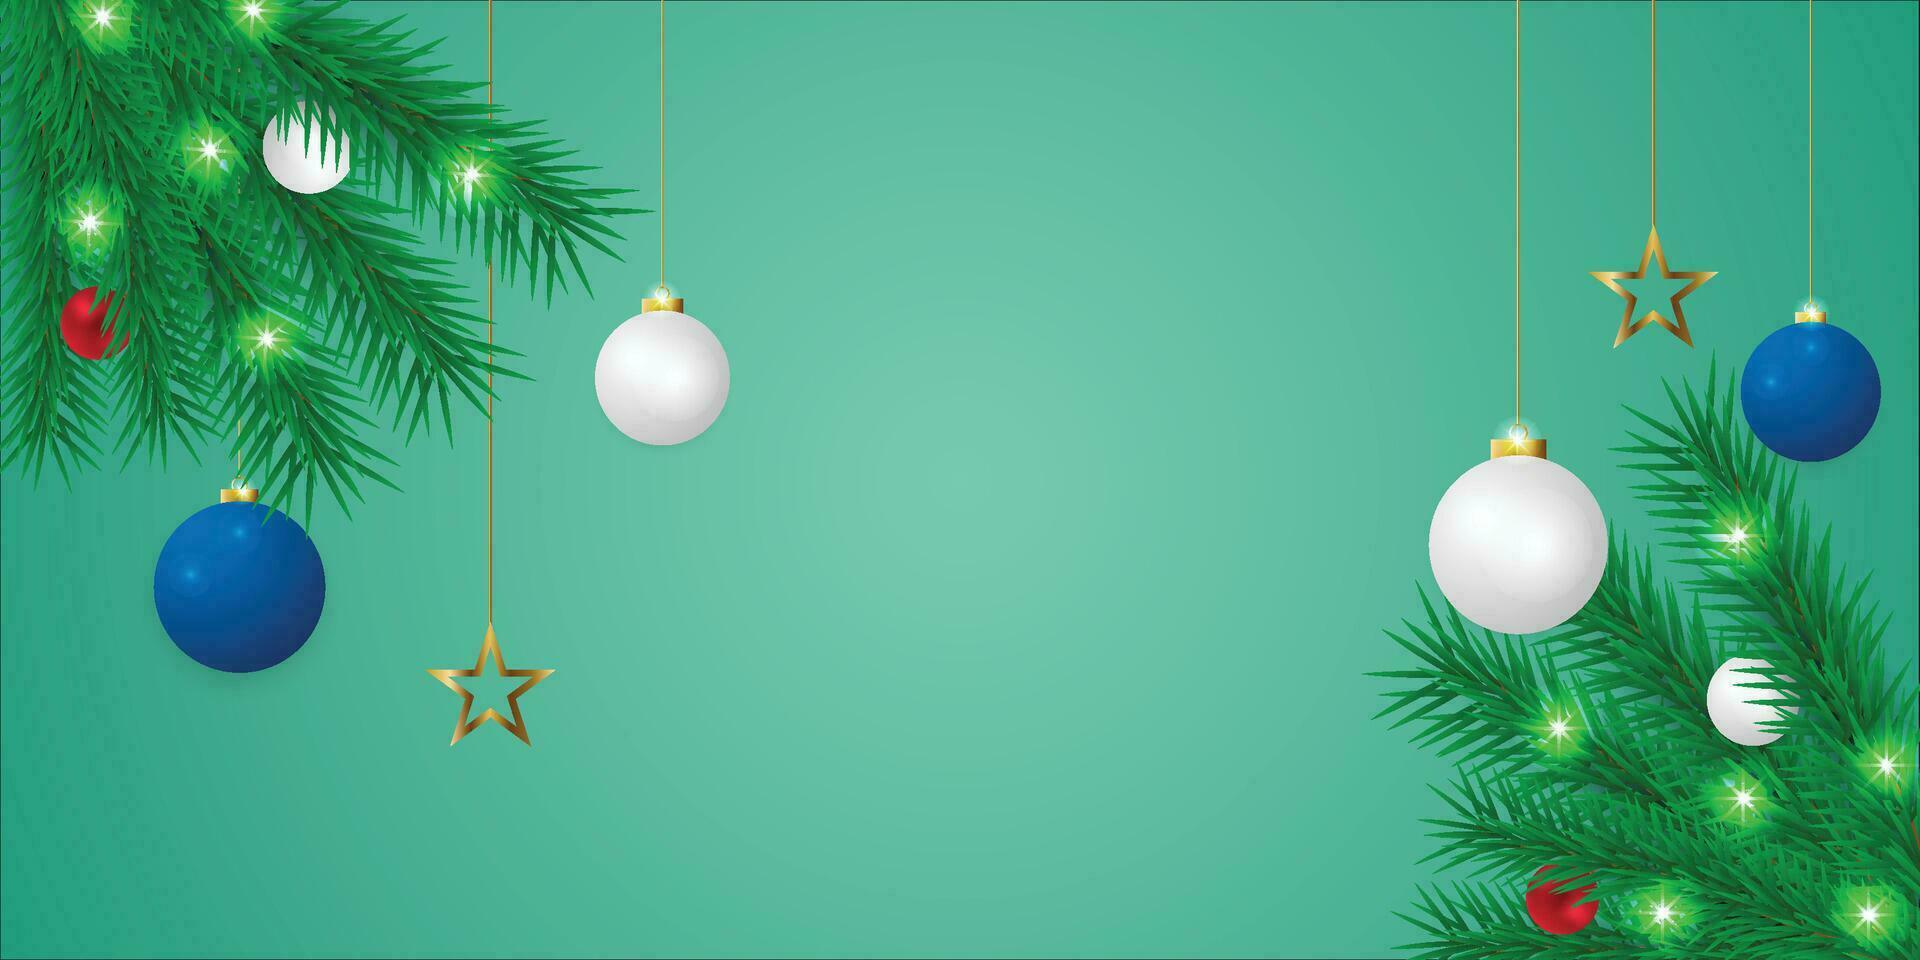 Realistic Christmas green leaf banner with blue and white balls with lights and golden stars. vector